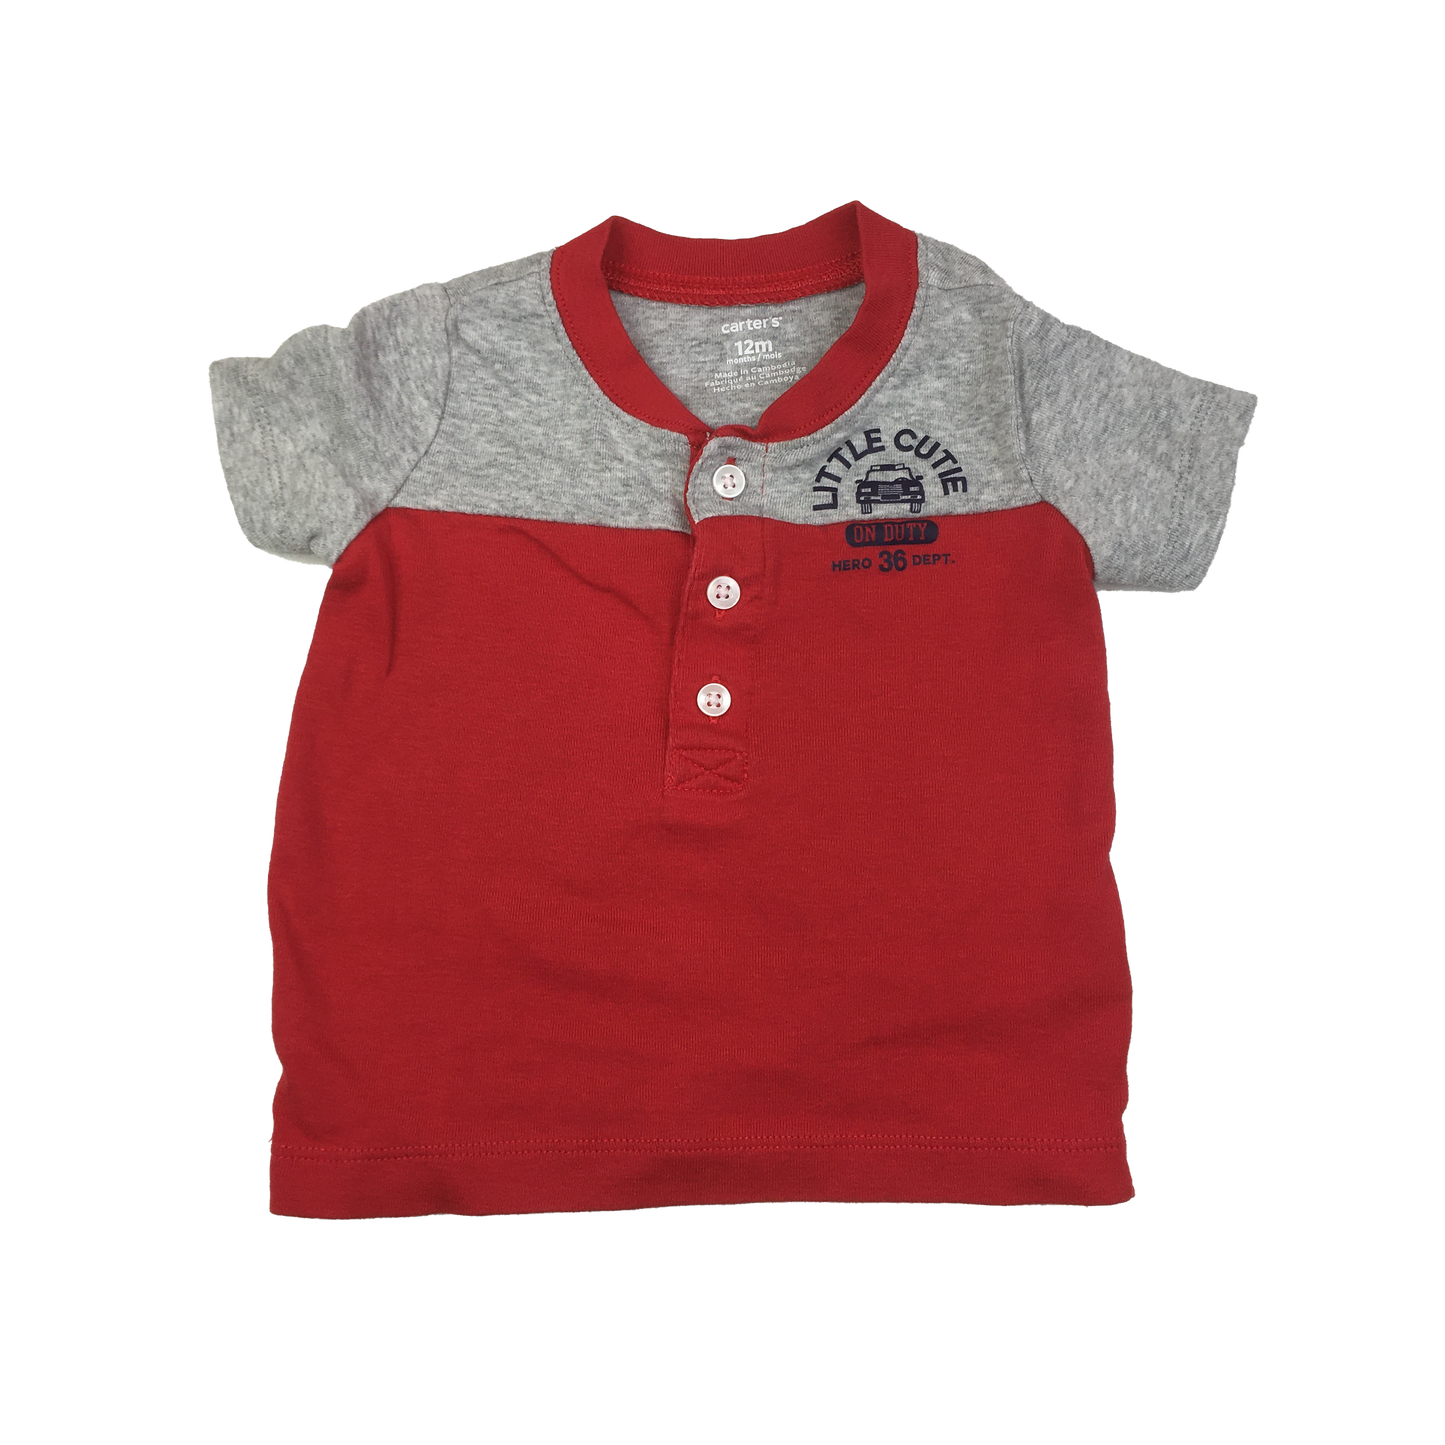 Carter's Red & Grey T-Shirt with Police Car "Little Cutie On Duty" 12M